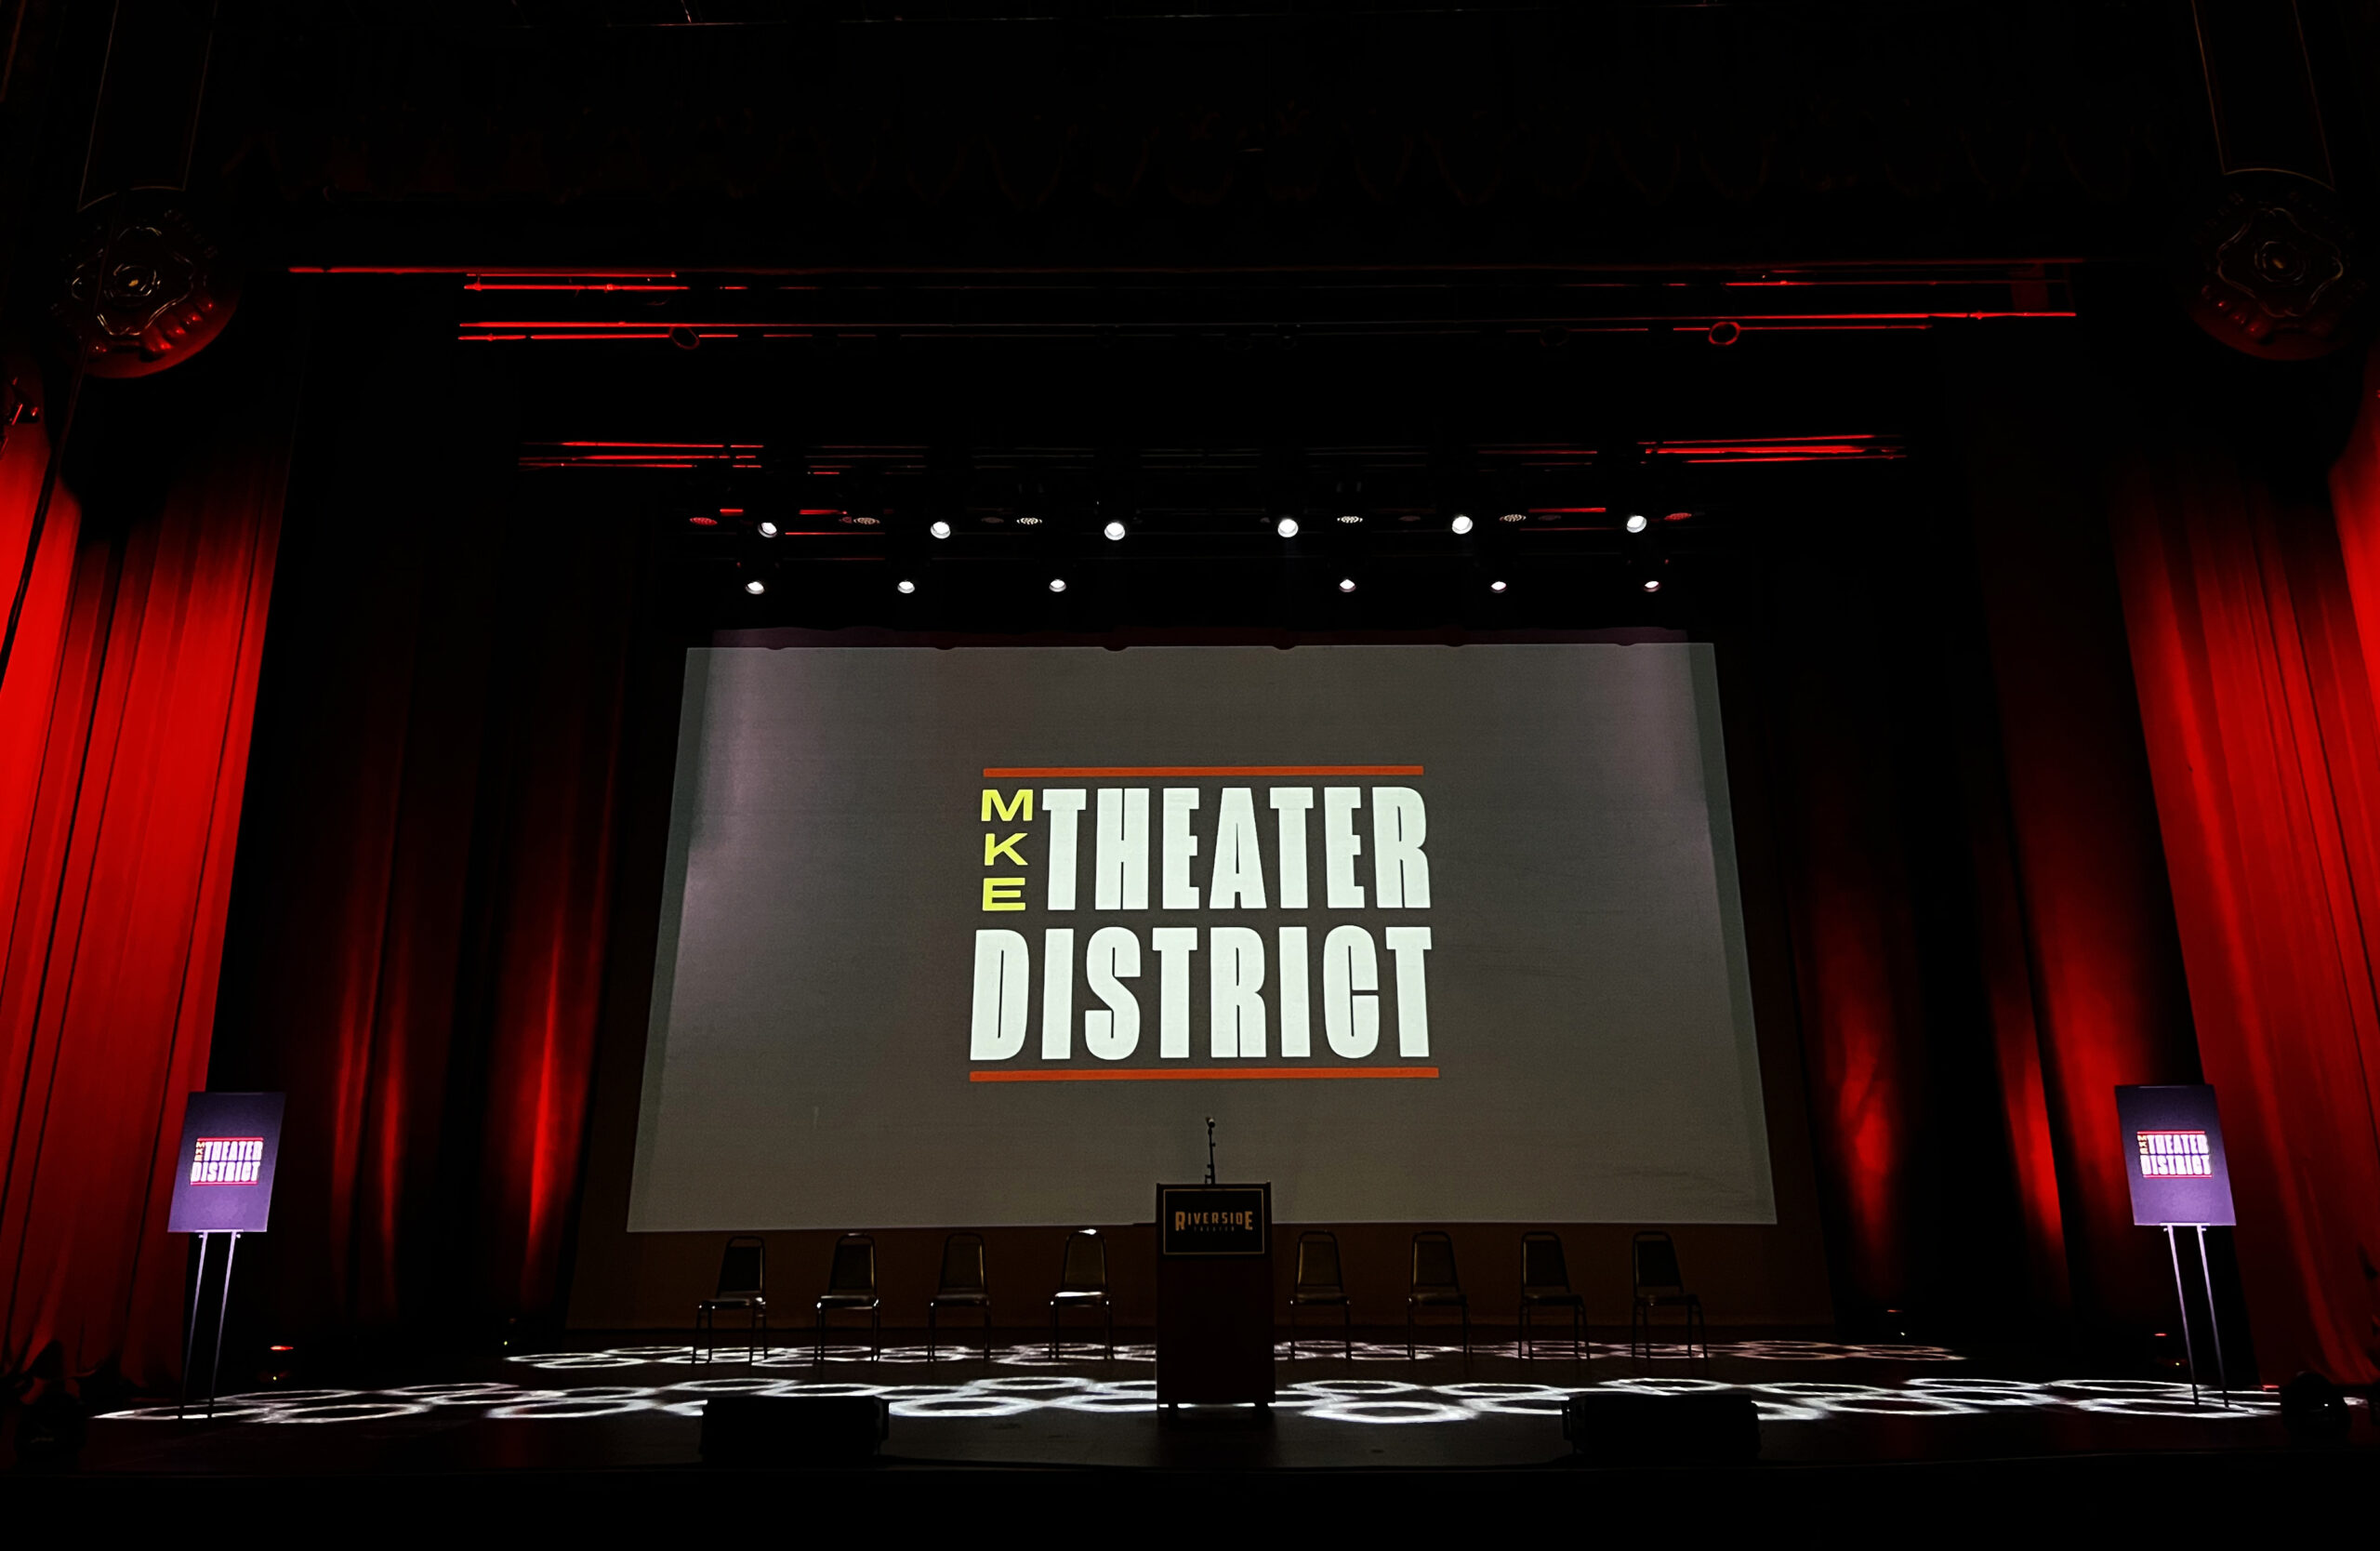 the Milwaukee Theater District logo is projected on a screen at a theater in downtown Milwaukee.